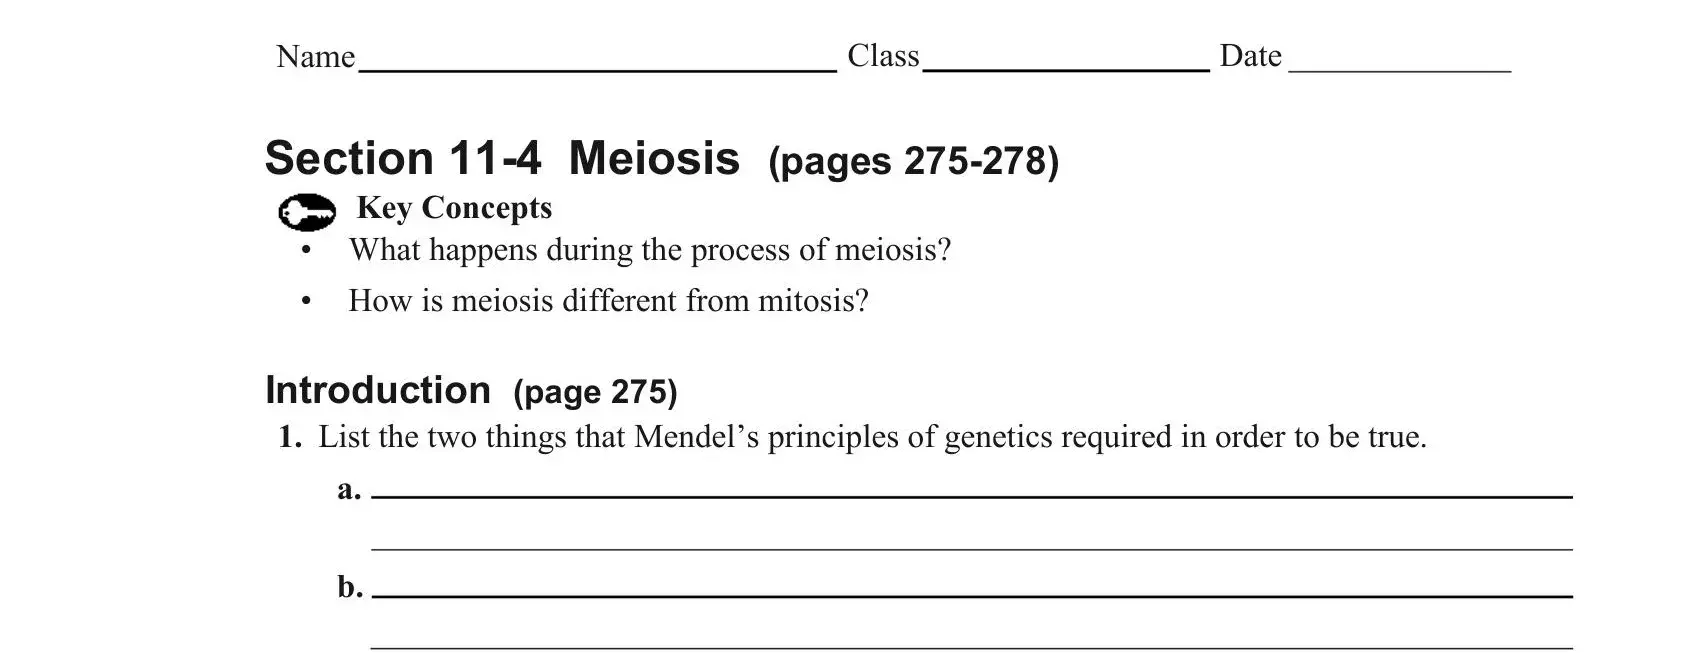 section 11 4 meiosis answers empty spaces to fill in